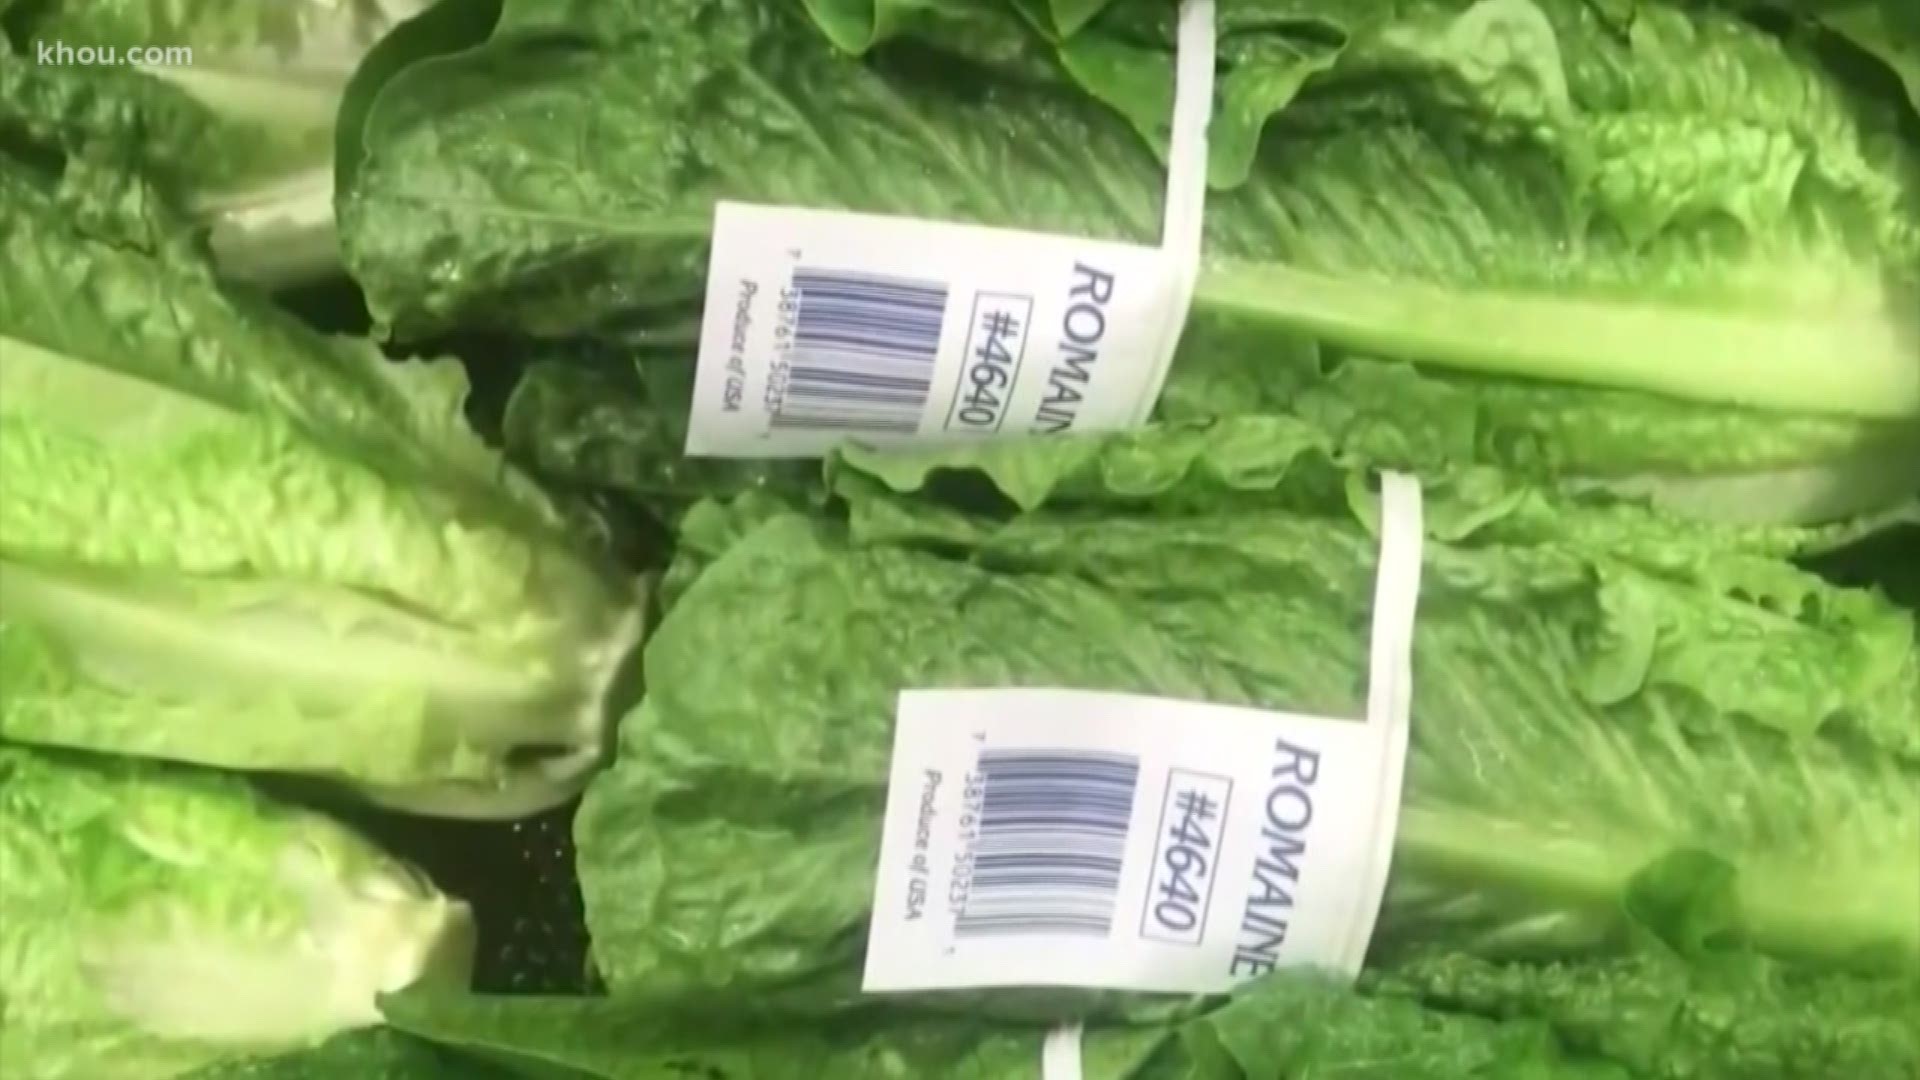 You may have seen reports of people in several states getting sick after eating romaine lettuce. But are these reports true? KHOU 11’s David Gonzalez verifies.